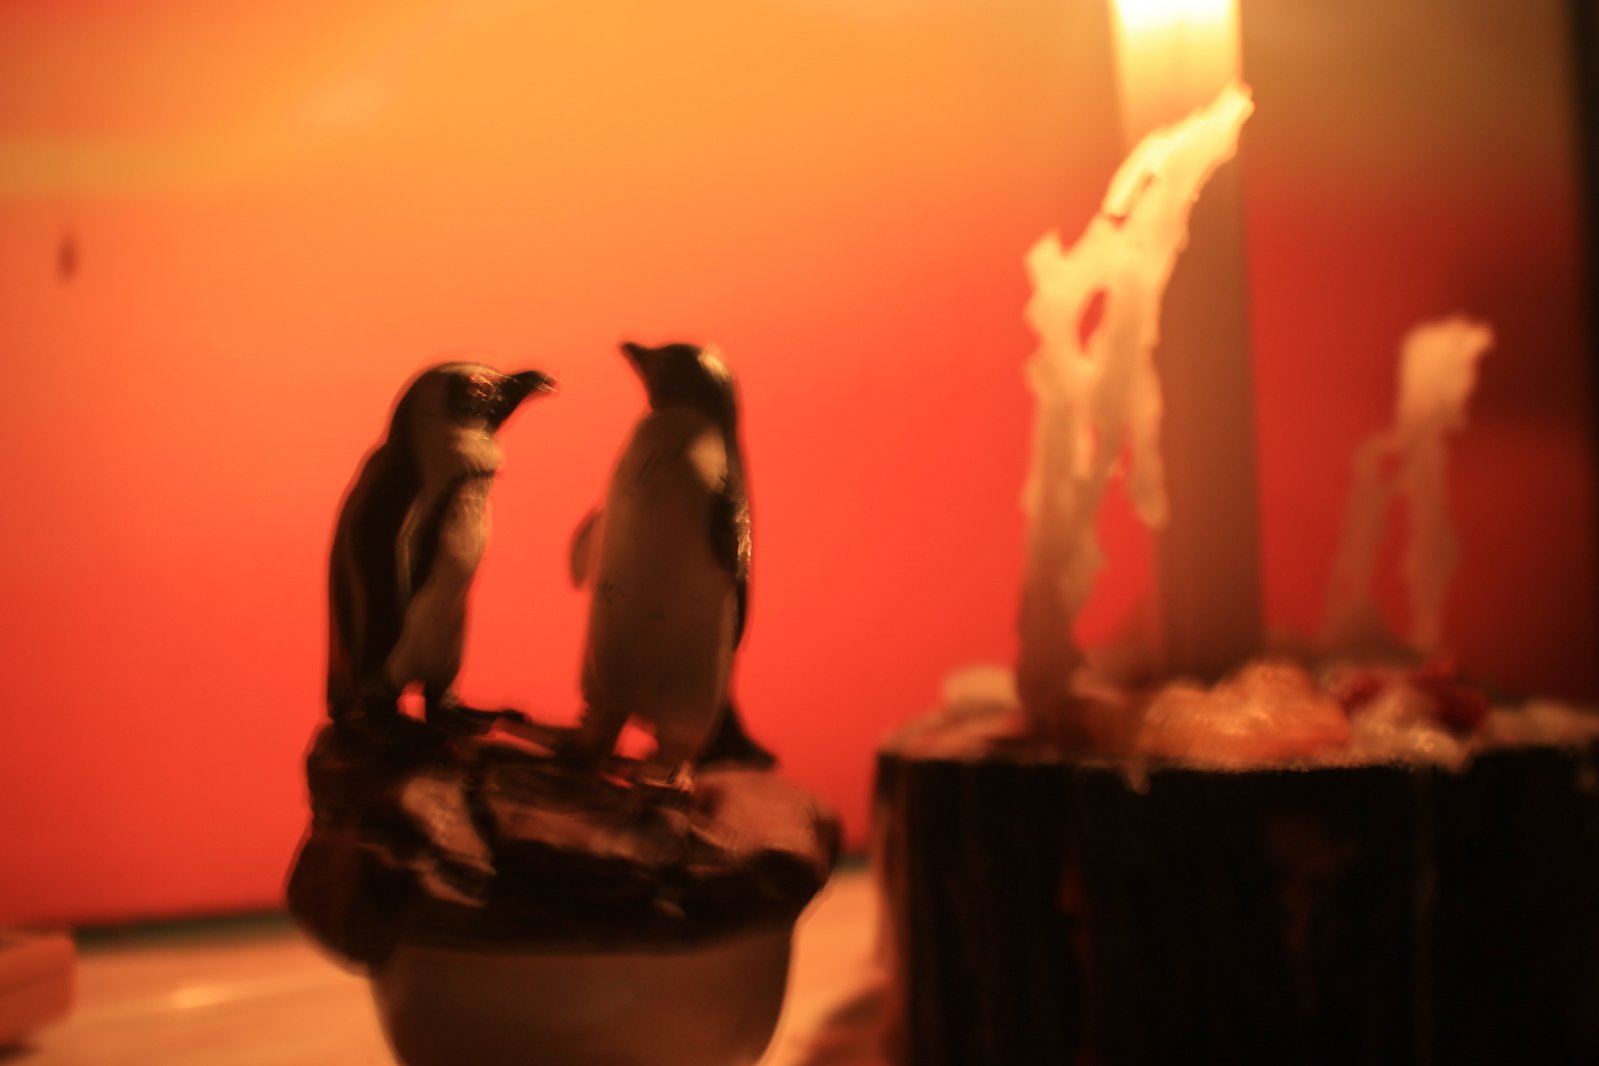 a cake has three penguins on top with a lit candle